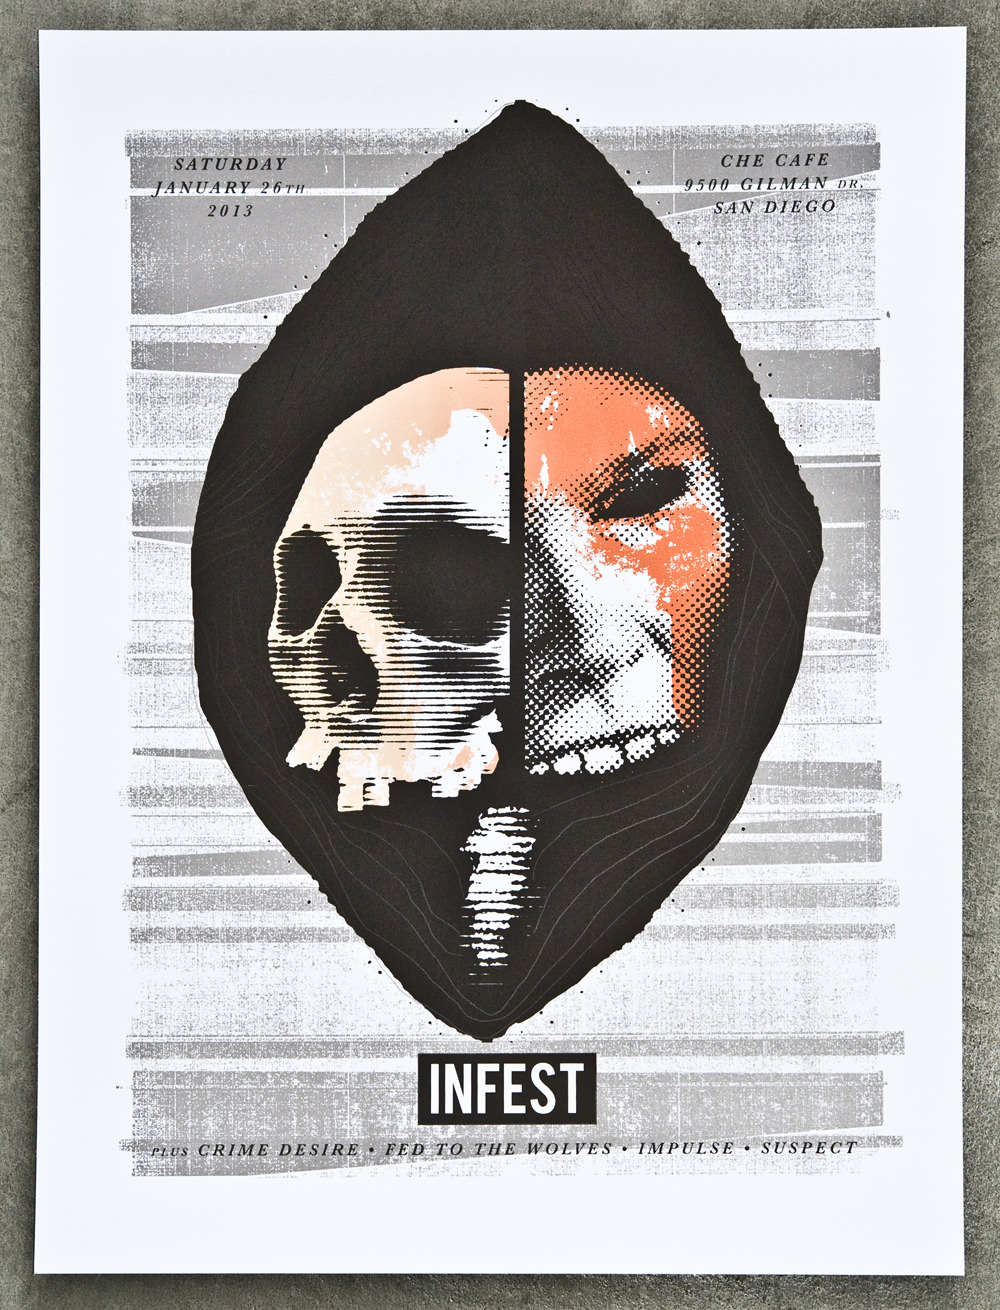 i designed and screen printed these INFEST posters for the Che Cafe show this saturday, they are 3 colors on 18"x24" paper and numbered in an edition of 120.